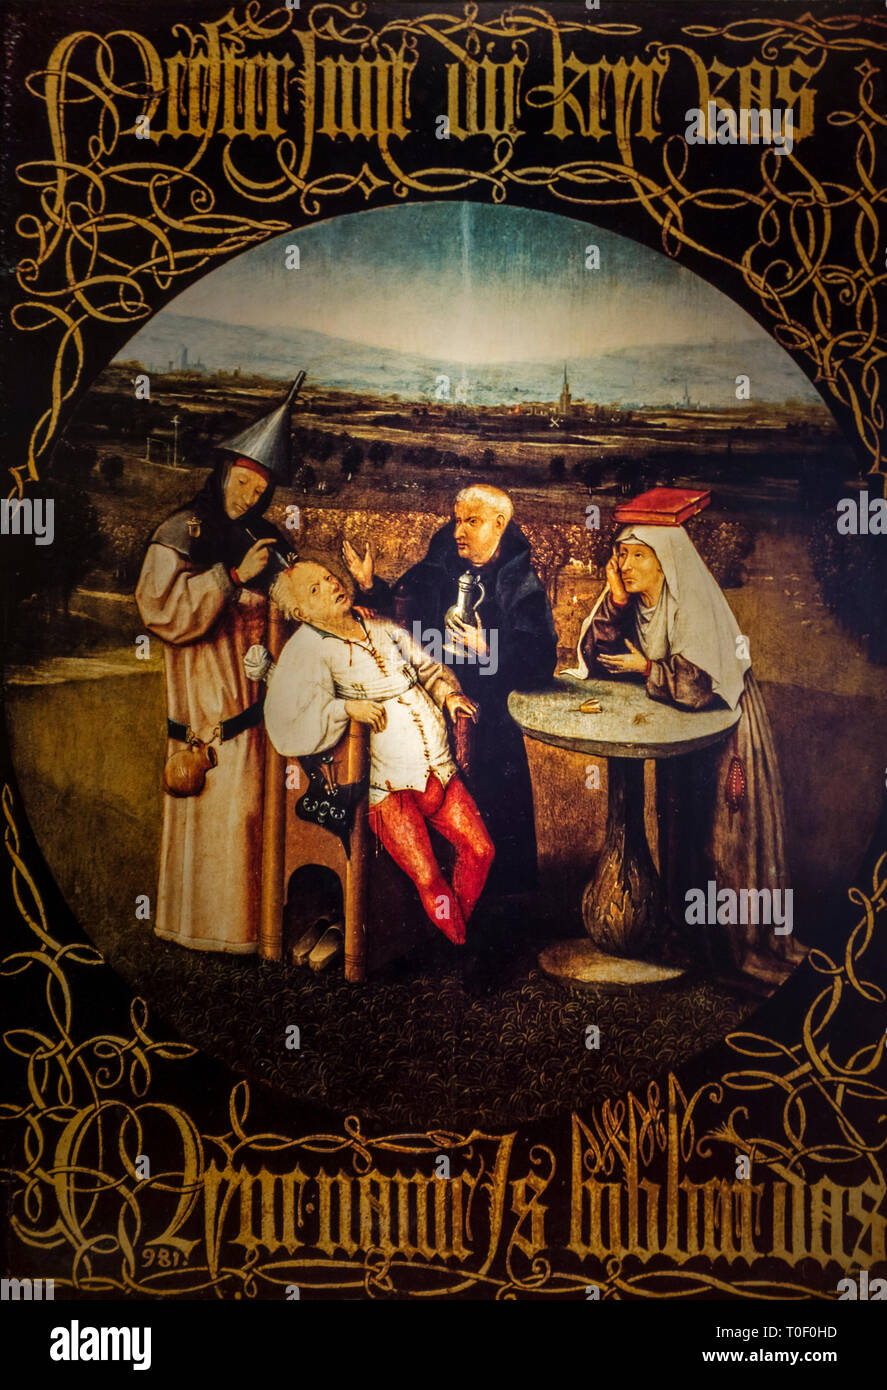 Painting by Hieronymus Bosch depicting trepanation / trepanning, surgical intervention in which a hole is drilled or scraped into the human skull Stock Photo